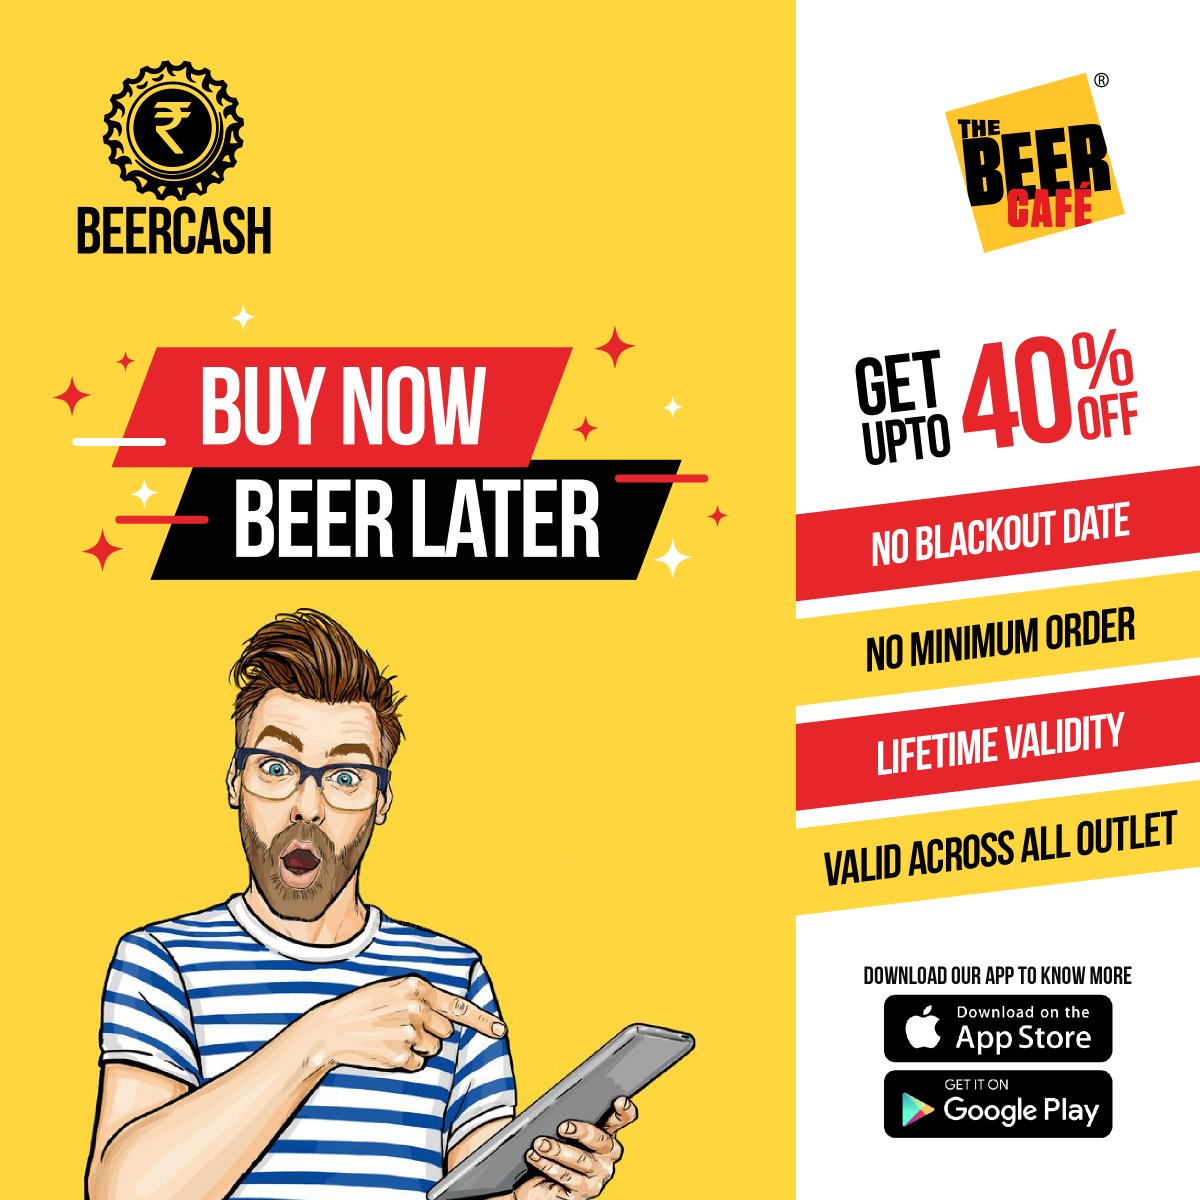 Buy Now Beer Later - Enjoy the '#BeerCash' voucher and get upto 40% off.. there is no minimum order requirement and no blackout dates..just enjoy whenever you want...this voucher has lifetime validity and valid across all outlets. Buy Now - thebeercafe.page.link/QQUAtwInsta